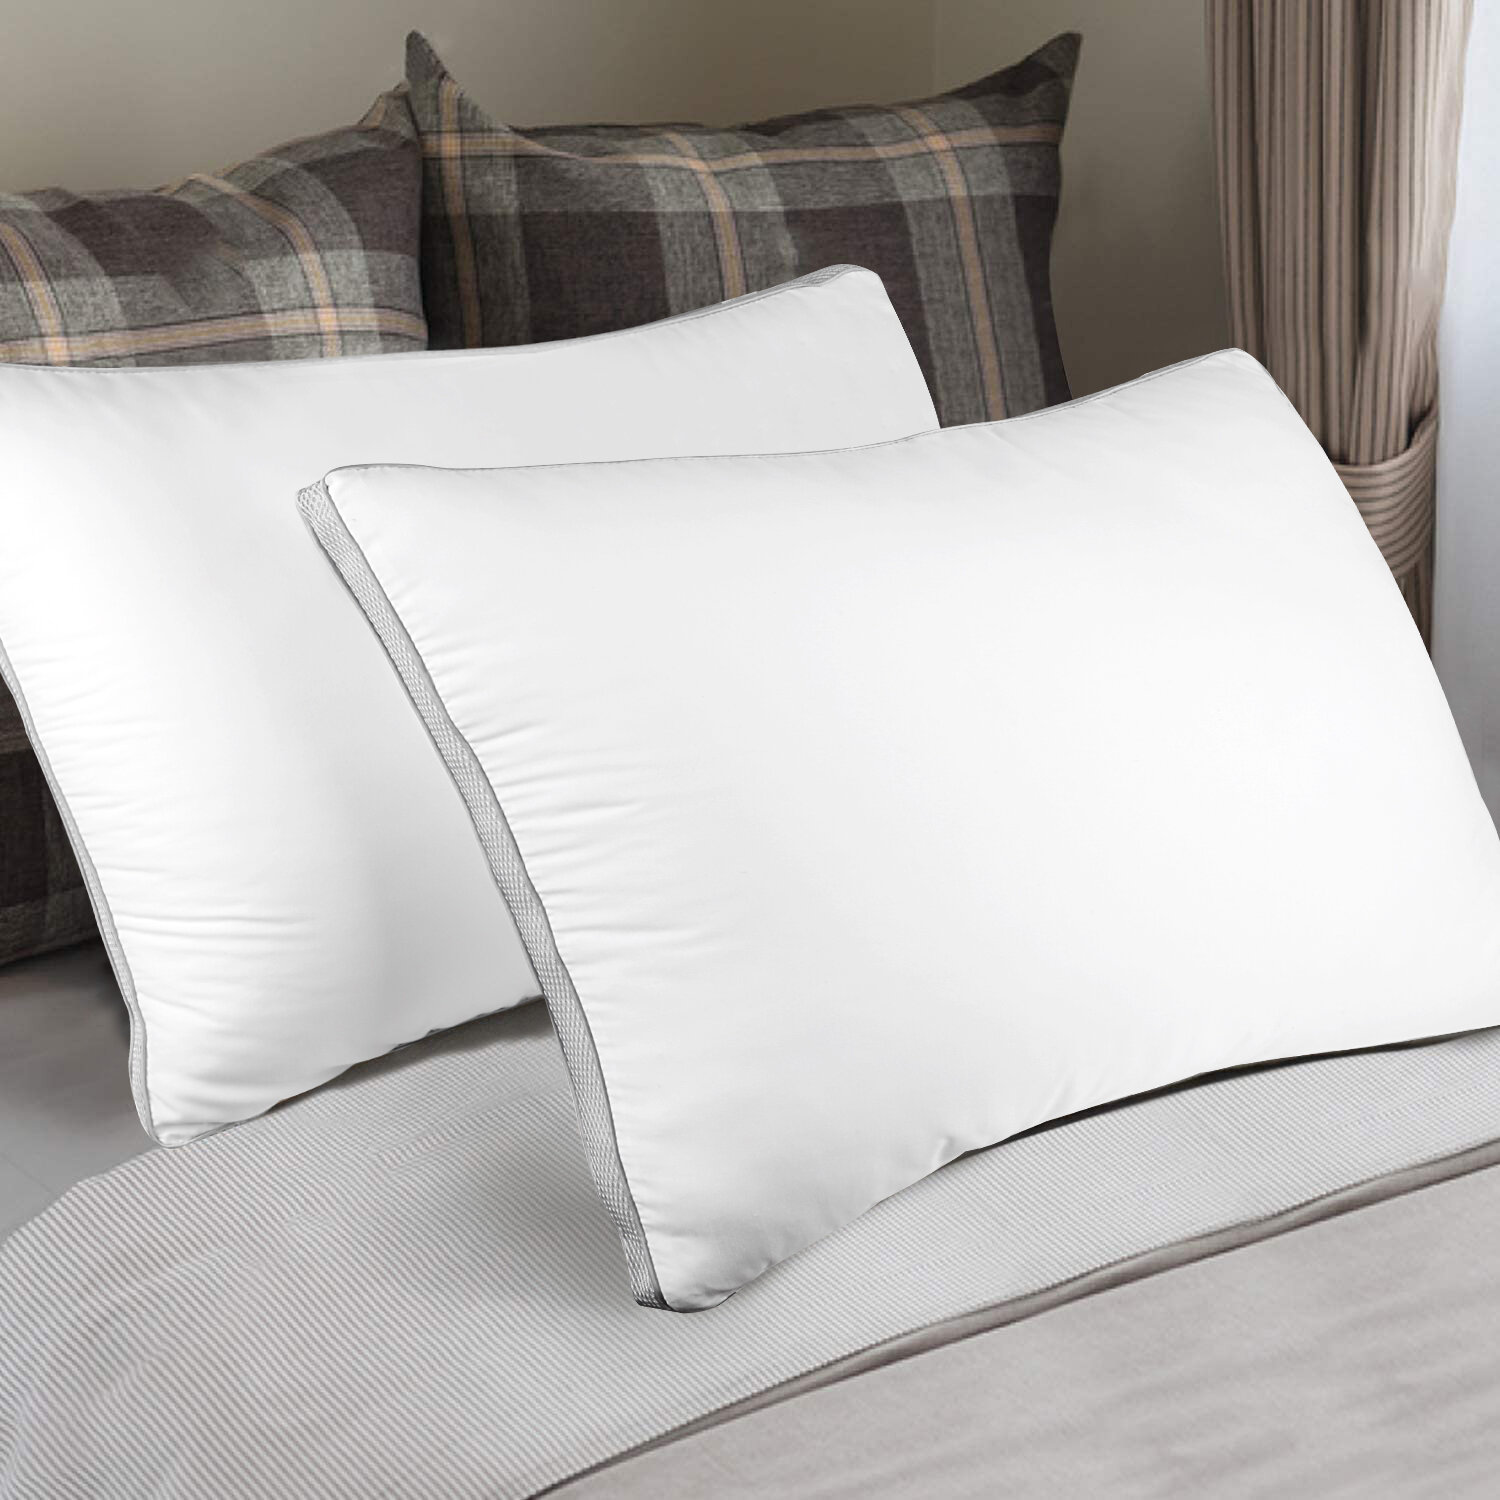 Ssup Clean Premium Bed Pillow for Sleeping - Luxury Hotel